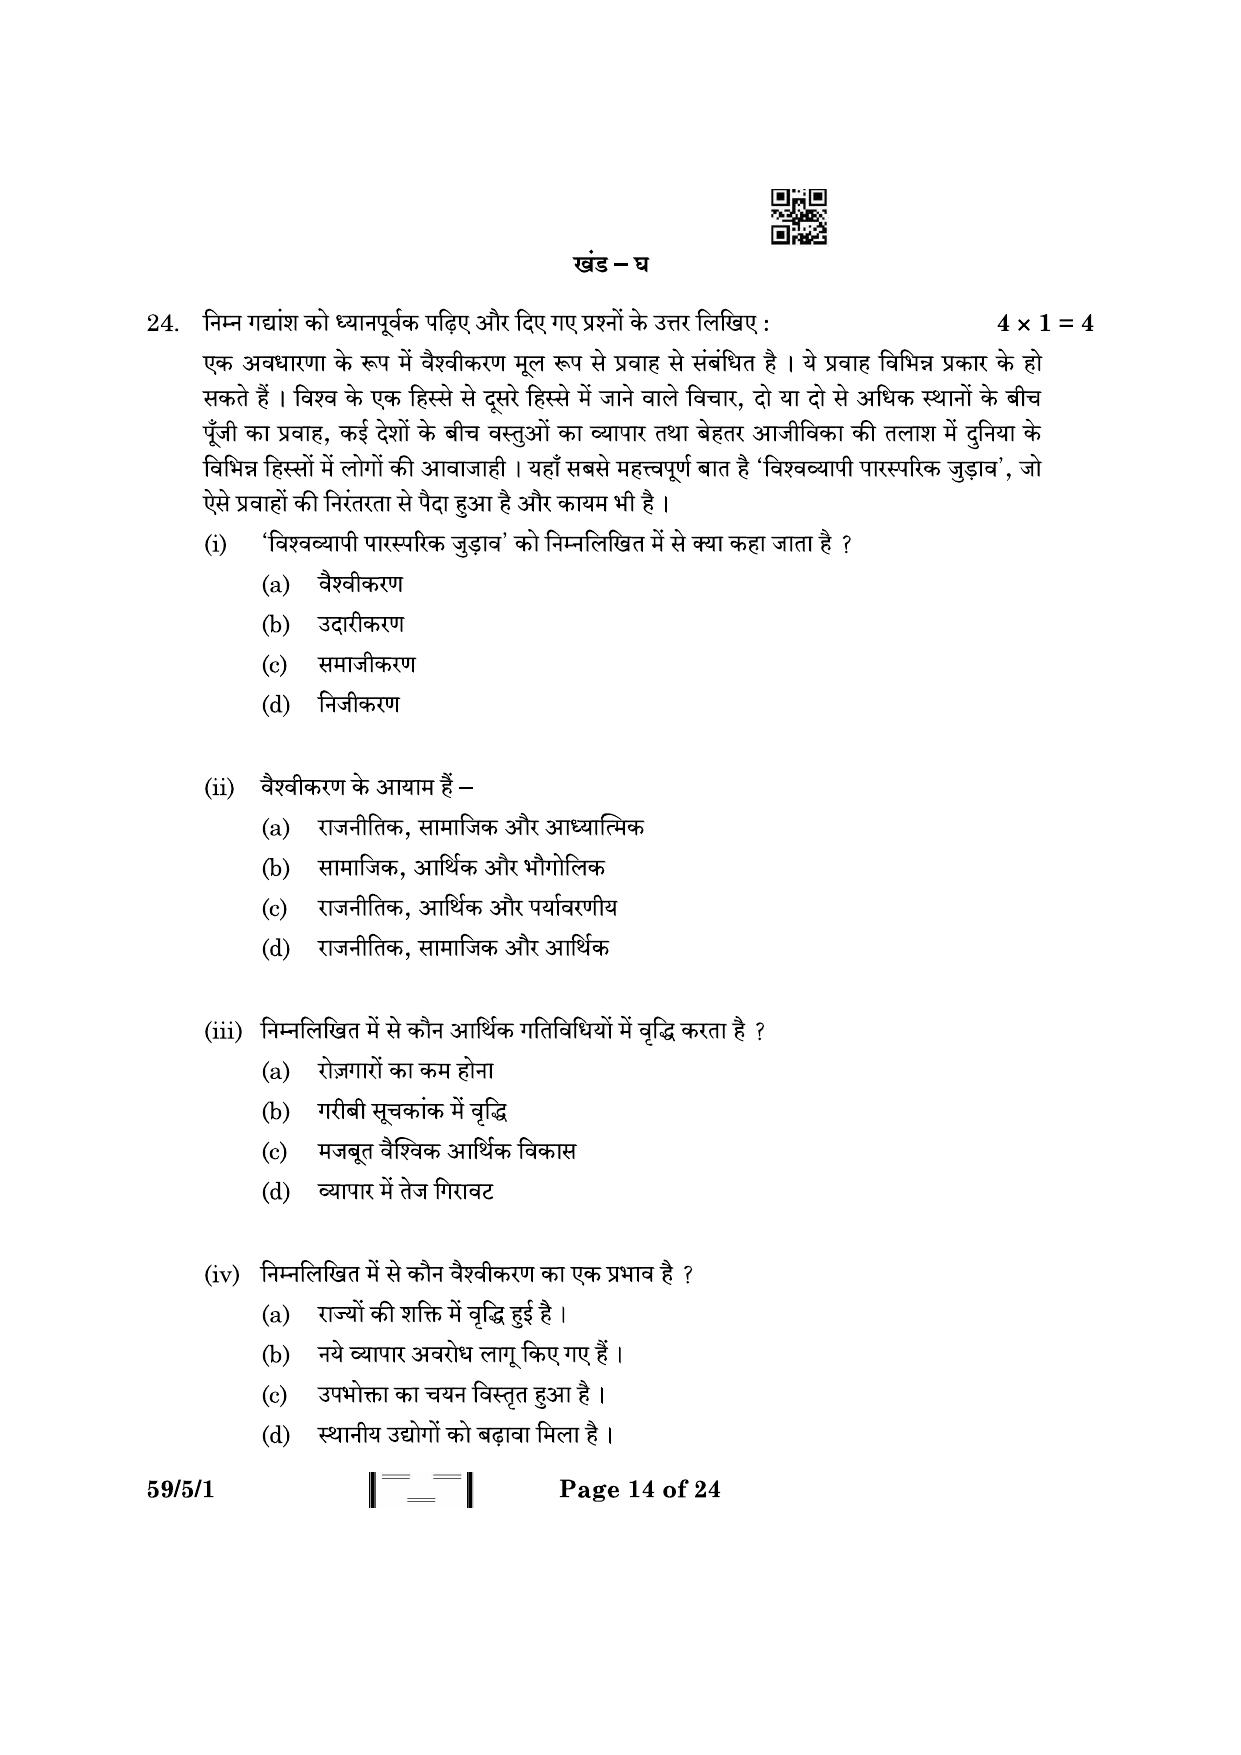 CBSE Class 12 59-5-1 Political Science 2023 Question Paper - Page 14